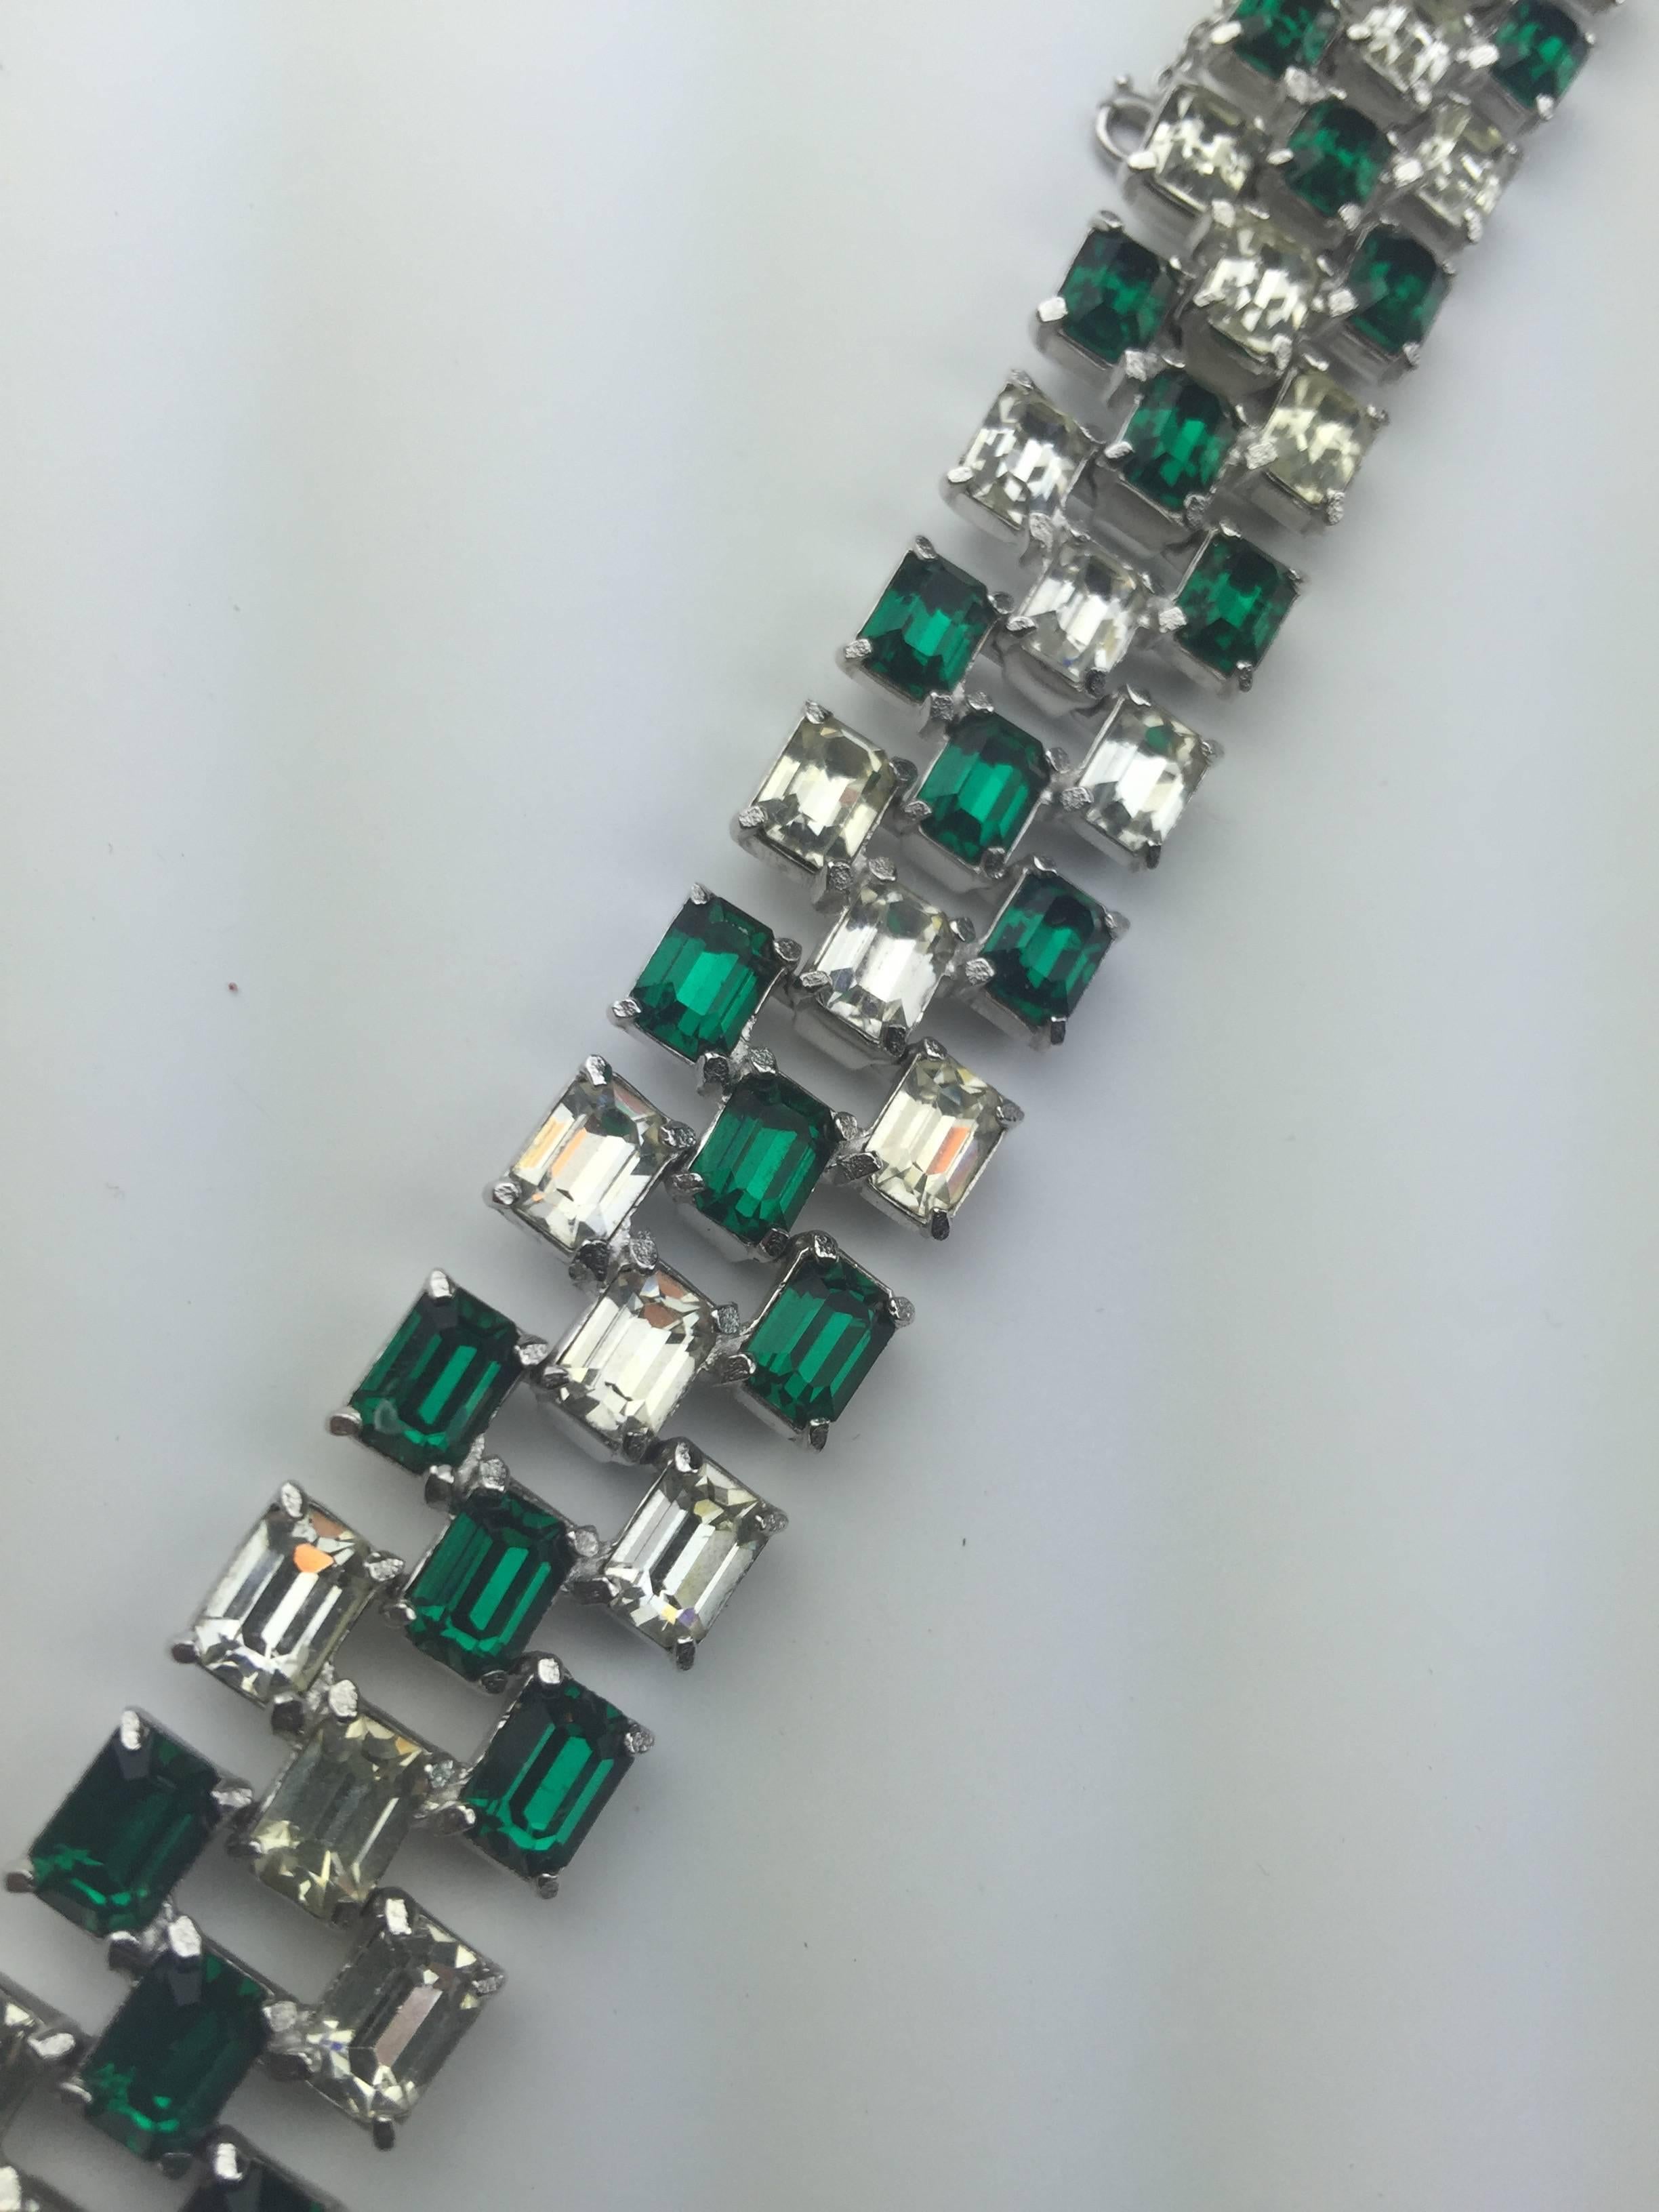 Wonderful early 1940's chunky Art Deco style bracelet with rectangular, highly faceted, faux emeralds and diamonds.  Rare and early Eisenberg piece which uses the finest quality Swarovski Austrian crystals.

Designed by Ruth M. Kamke.

Every